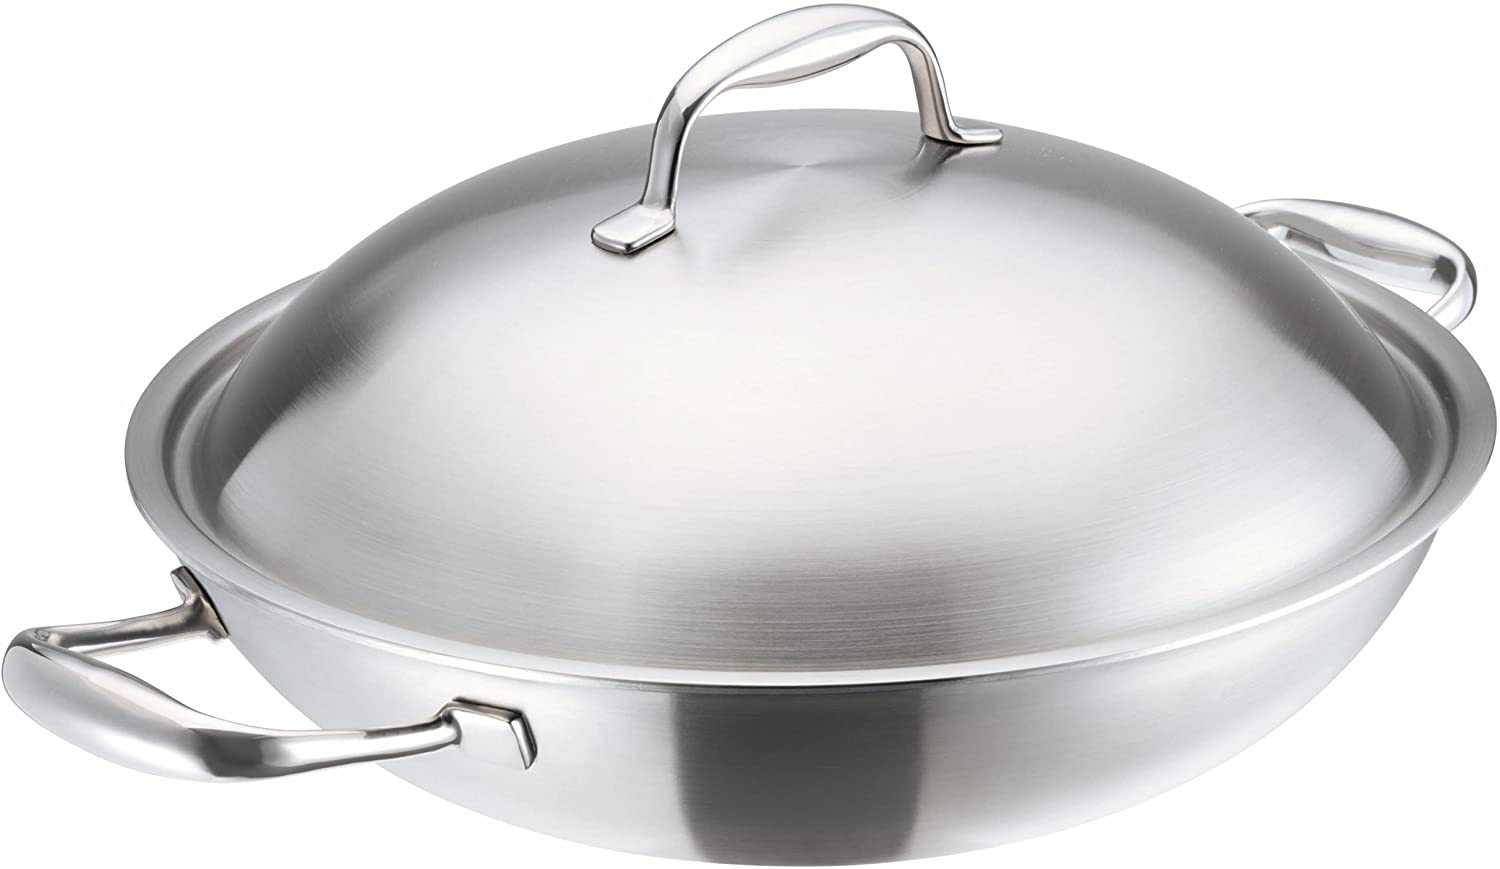 Kuhn Rikon 37036 High Dome Wok with Lid 32 cm Multilayer Stainless Steel 2 Side Handles